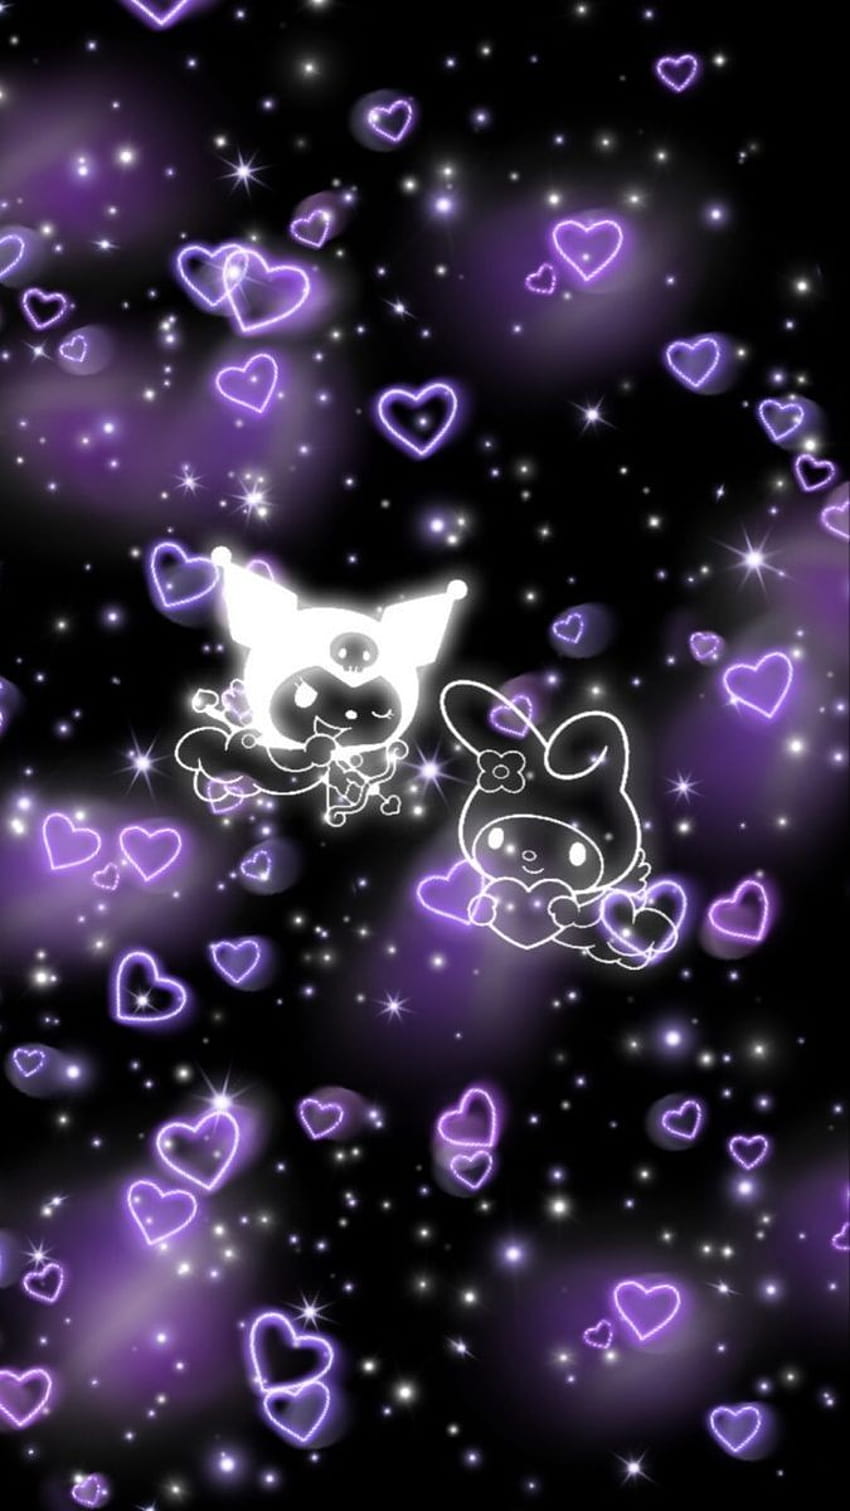 Download Show your true emotions with Emo Hello Kitty Wallpaper  Wallpapers com